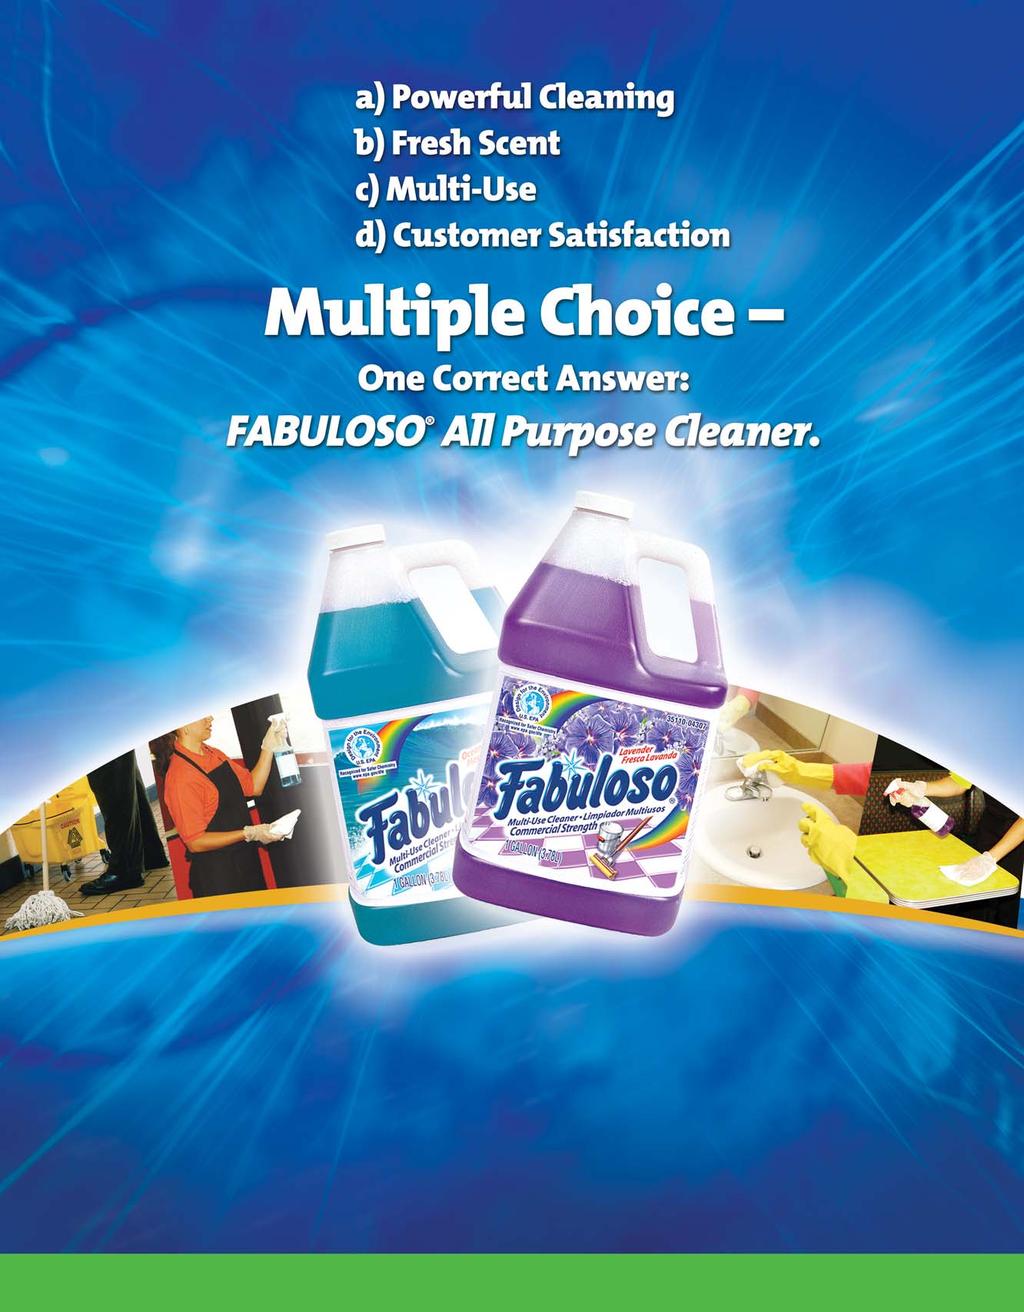 dd ULOSO ll Purpose leaner to your cleaning program.